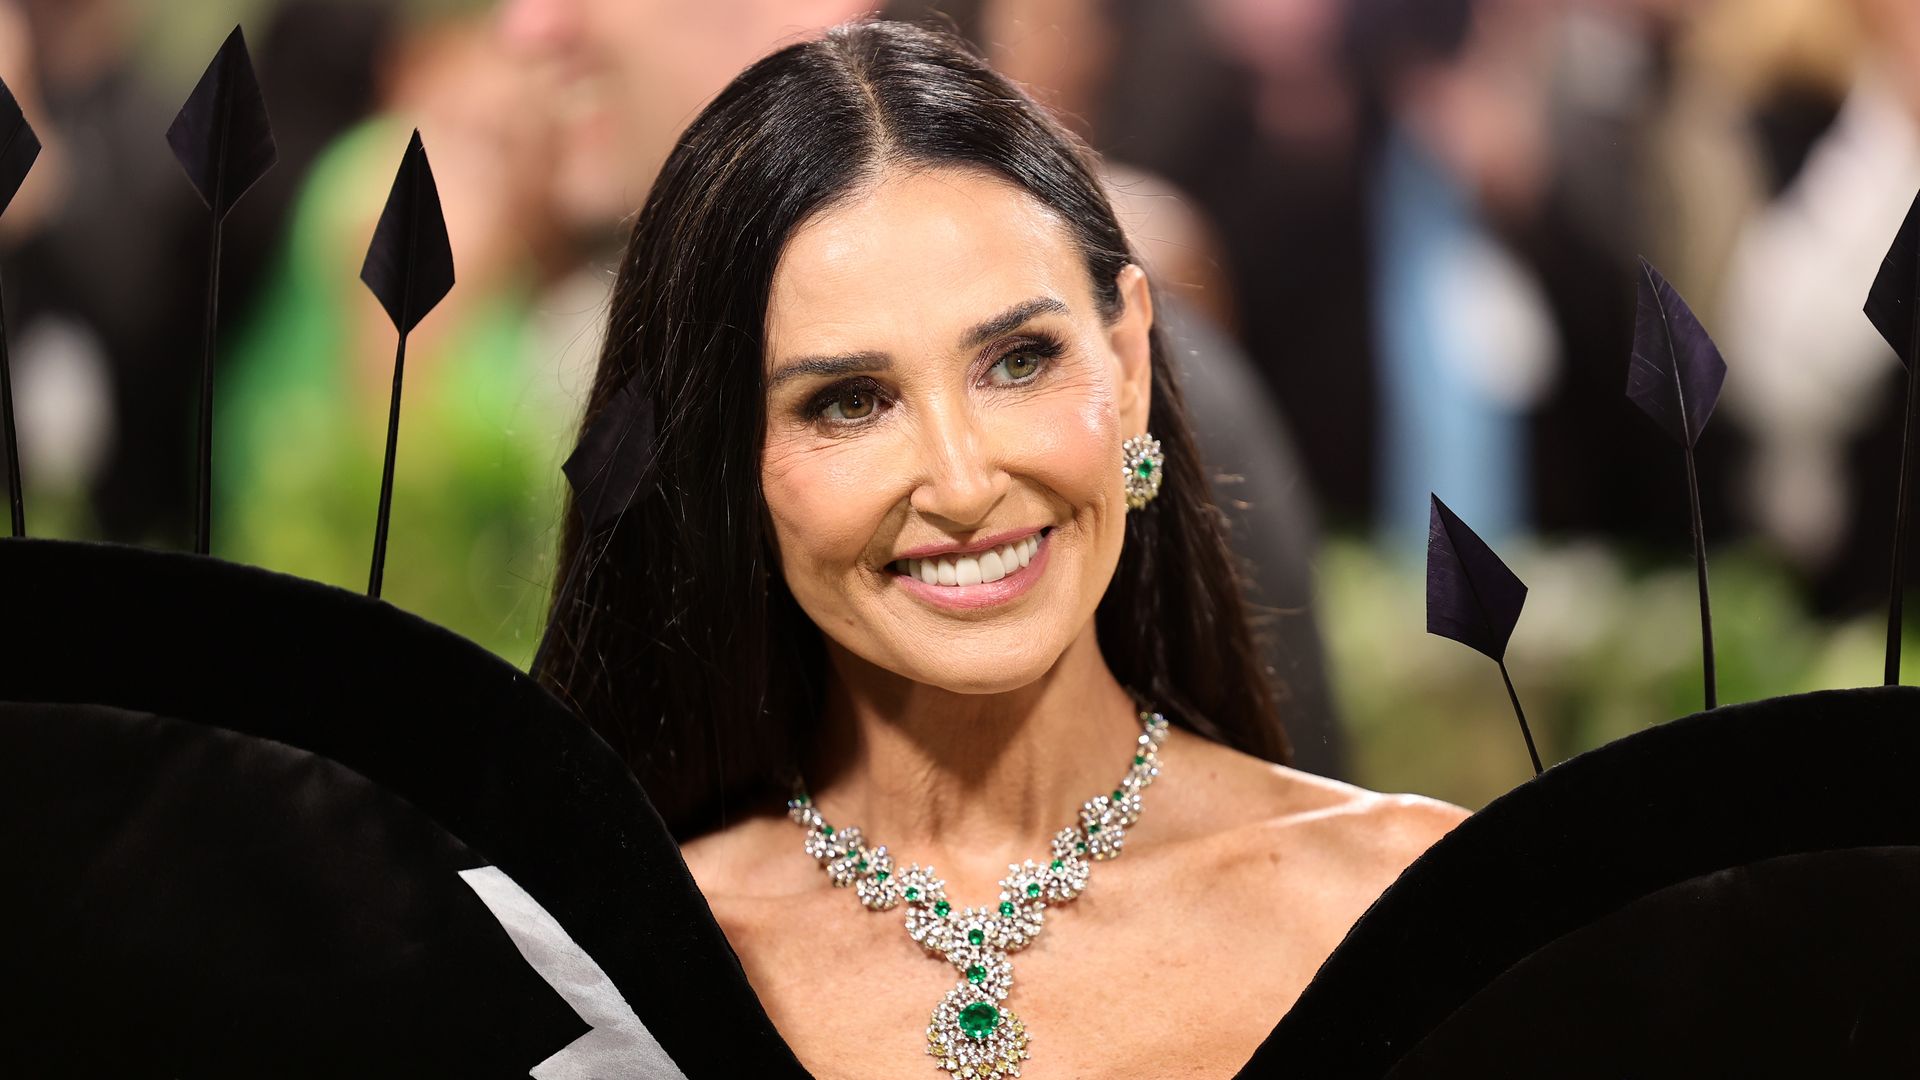 Demi Moore steps out in incredible Met Gala gown that took 11,000 hours to embroider